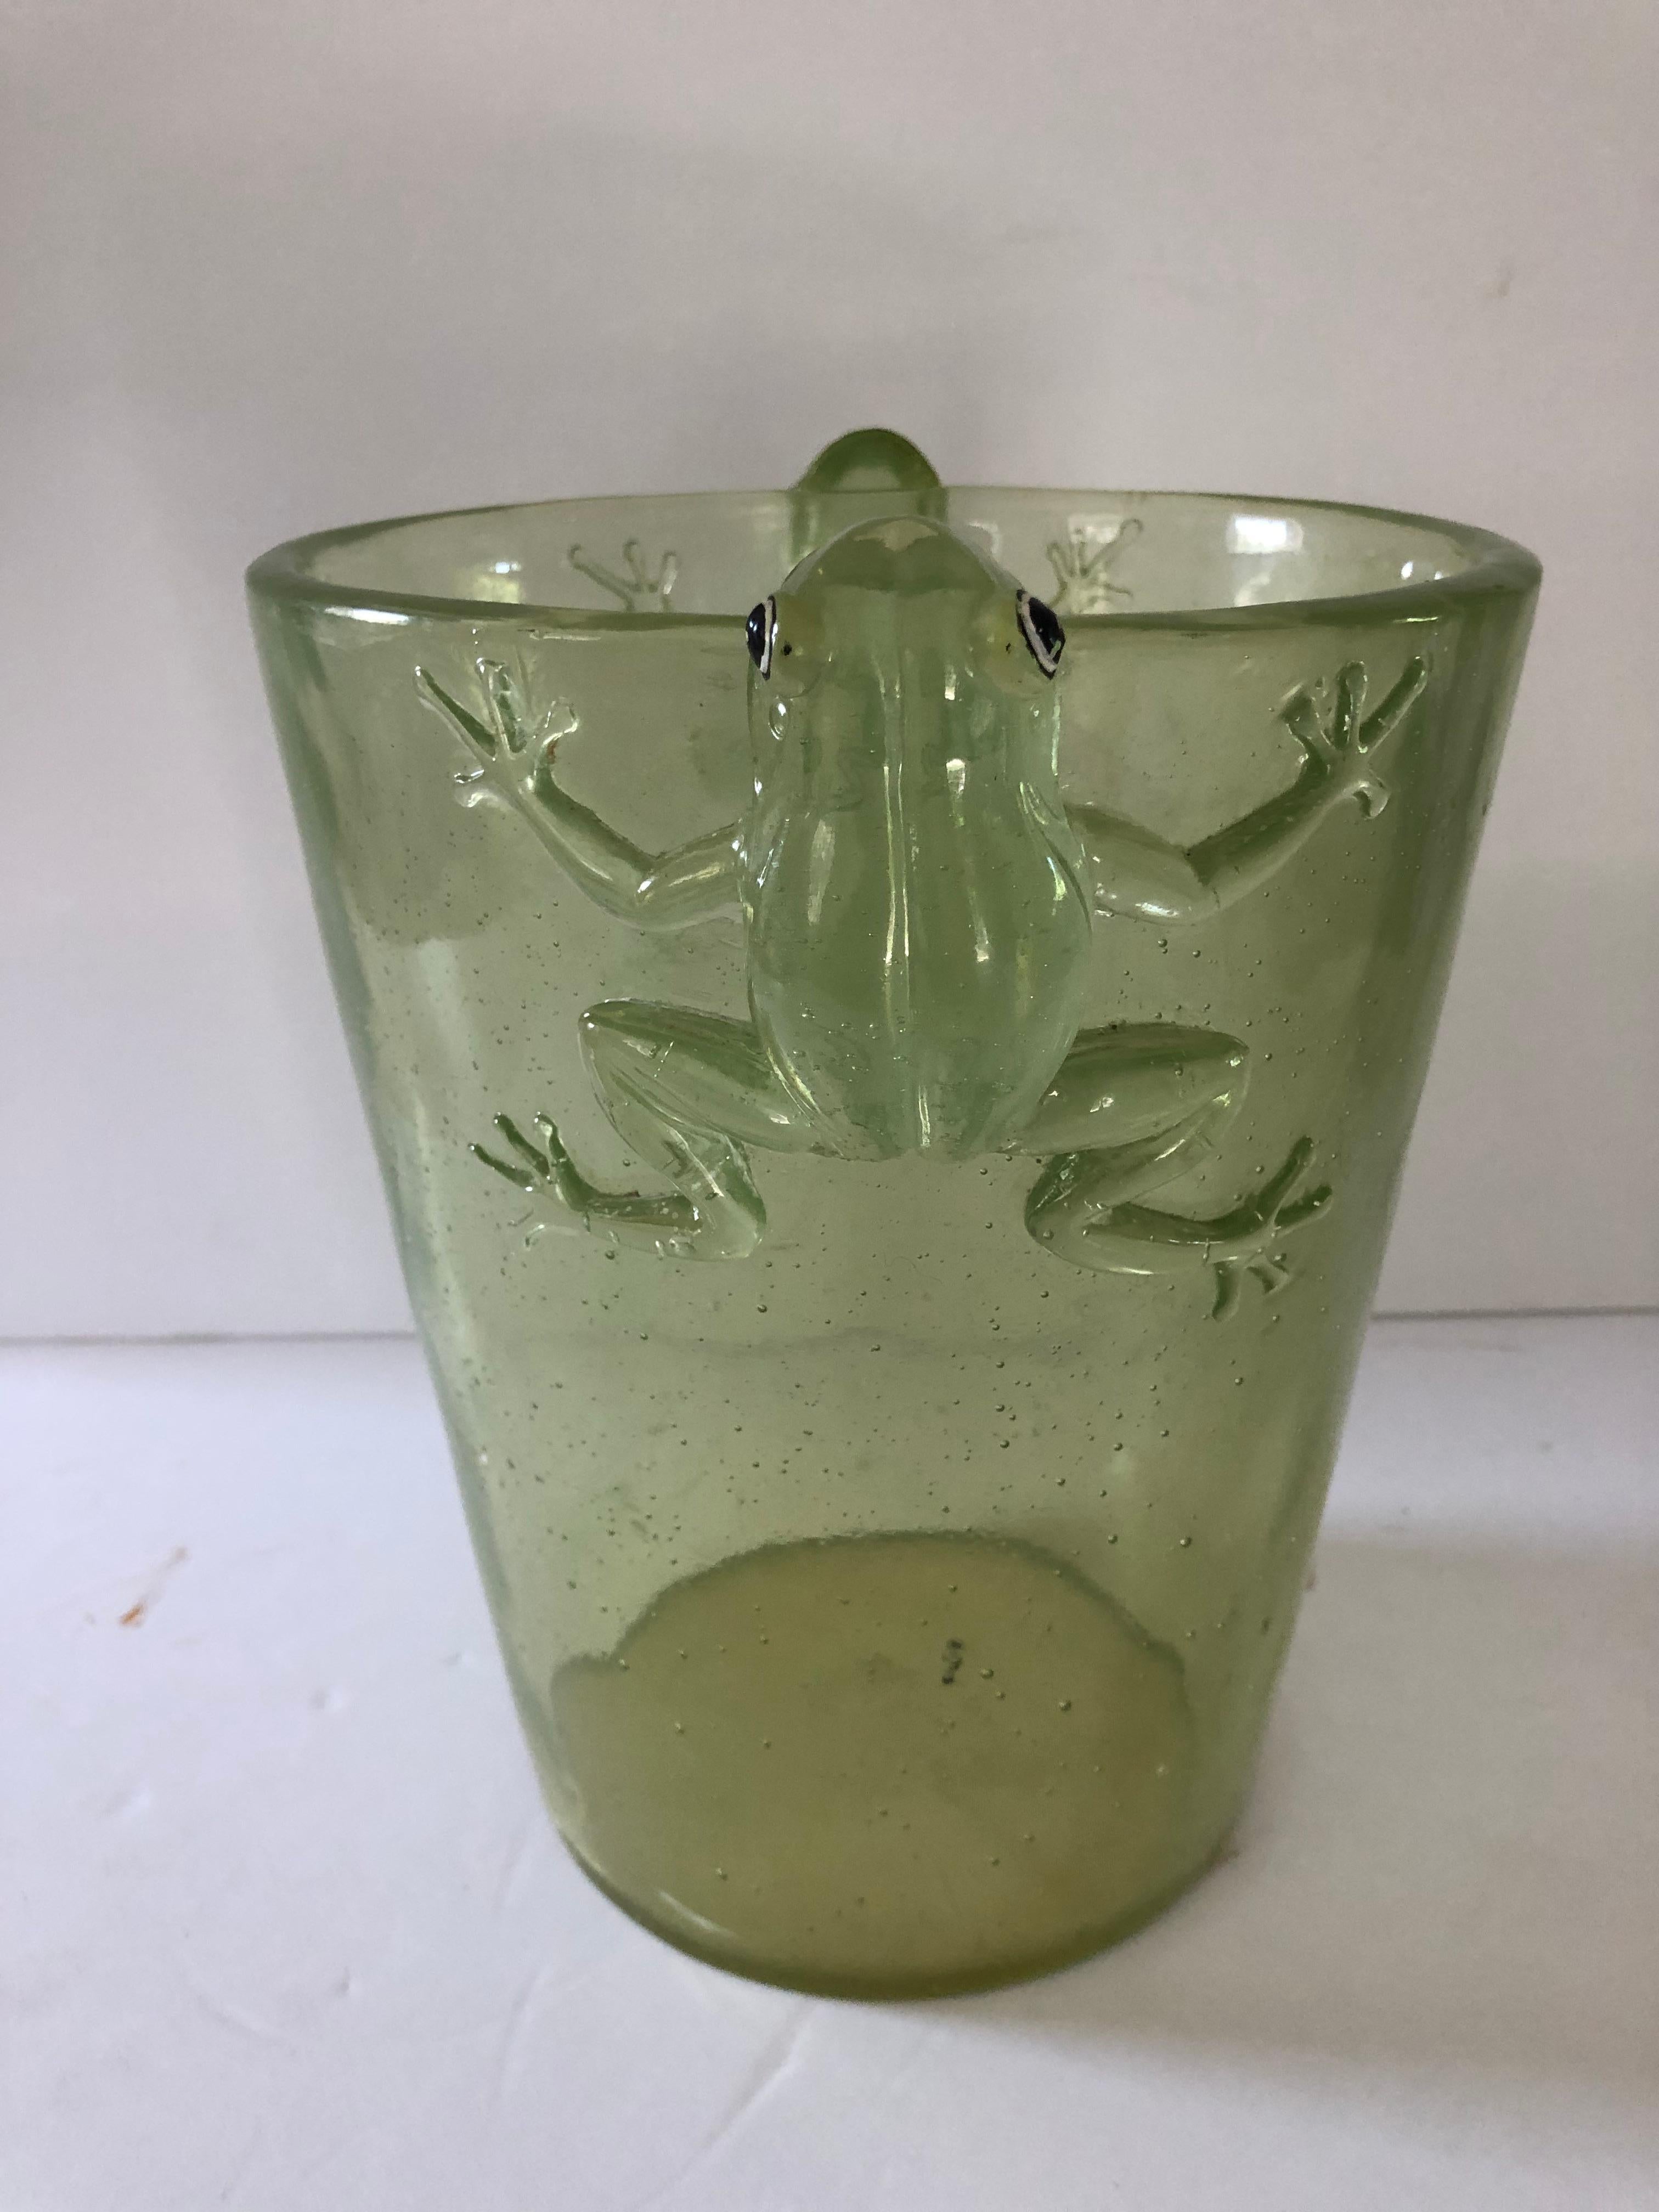 Thick acrylic ice bucket in a green translucent color and decorated with a frog on each side. Frogs have black and white eyes and appear to be grasping onto the bucket.